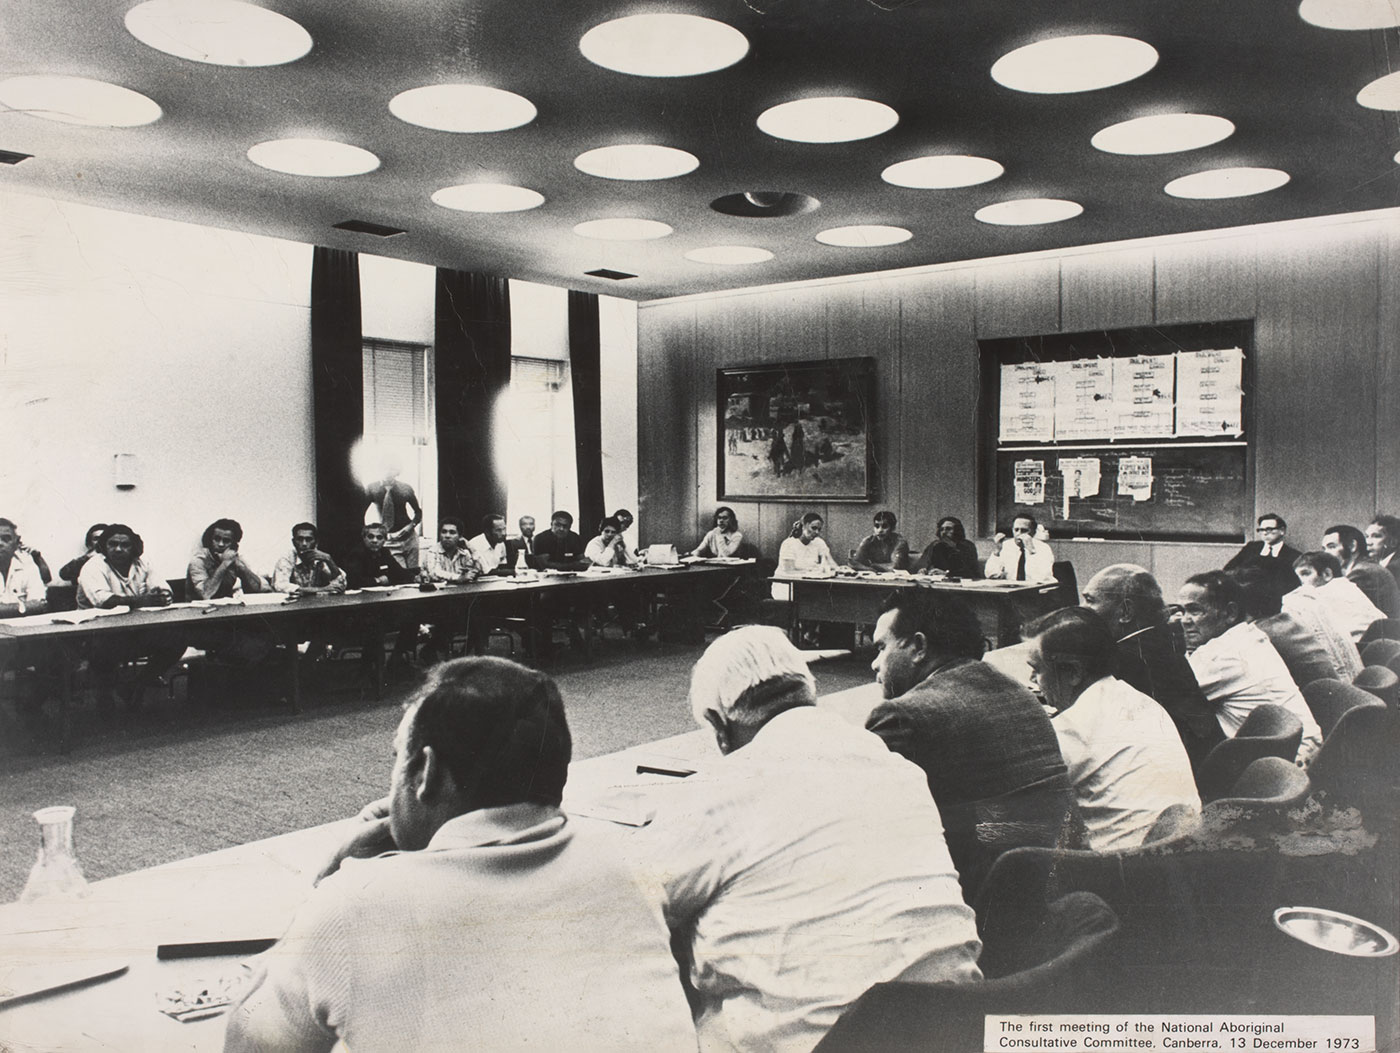 Black and white photo showing a meeting room with numerous Indigenous people sitting at tables arranged in a rectangular formation.